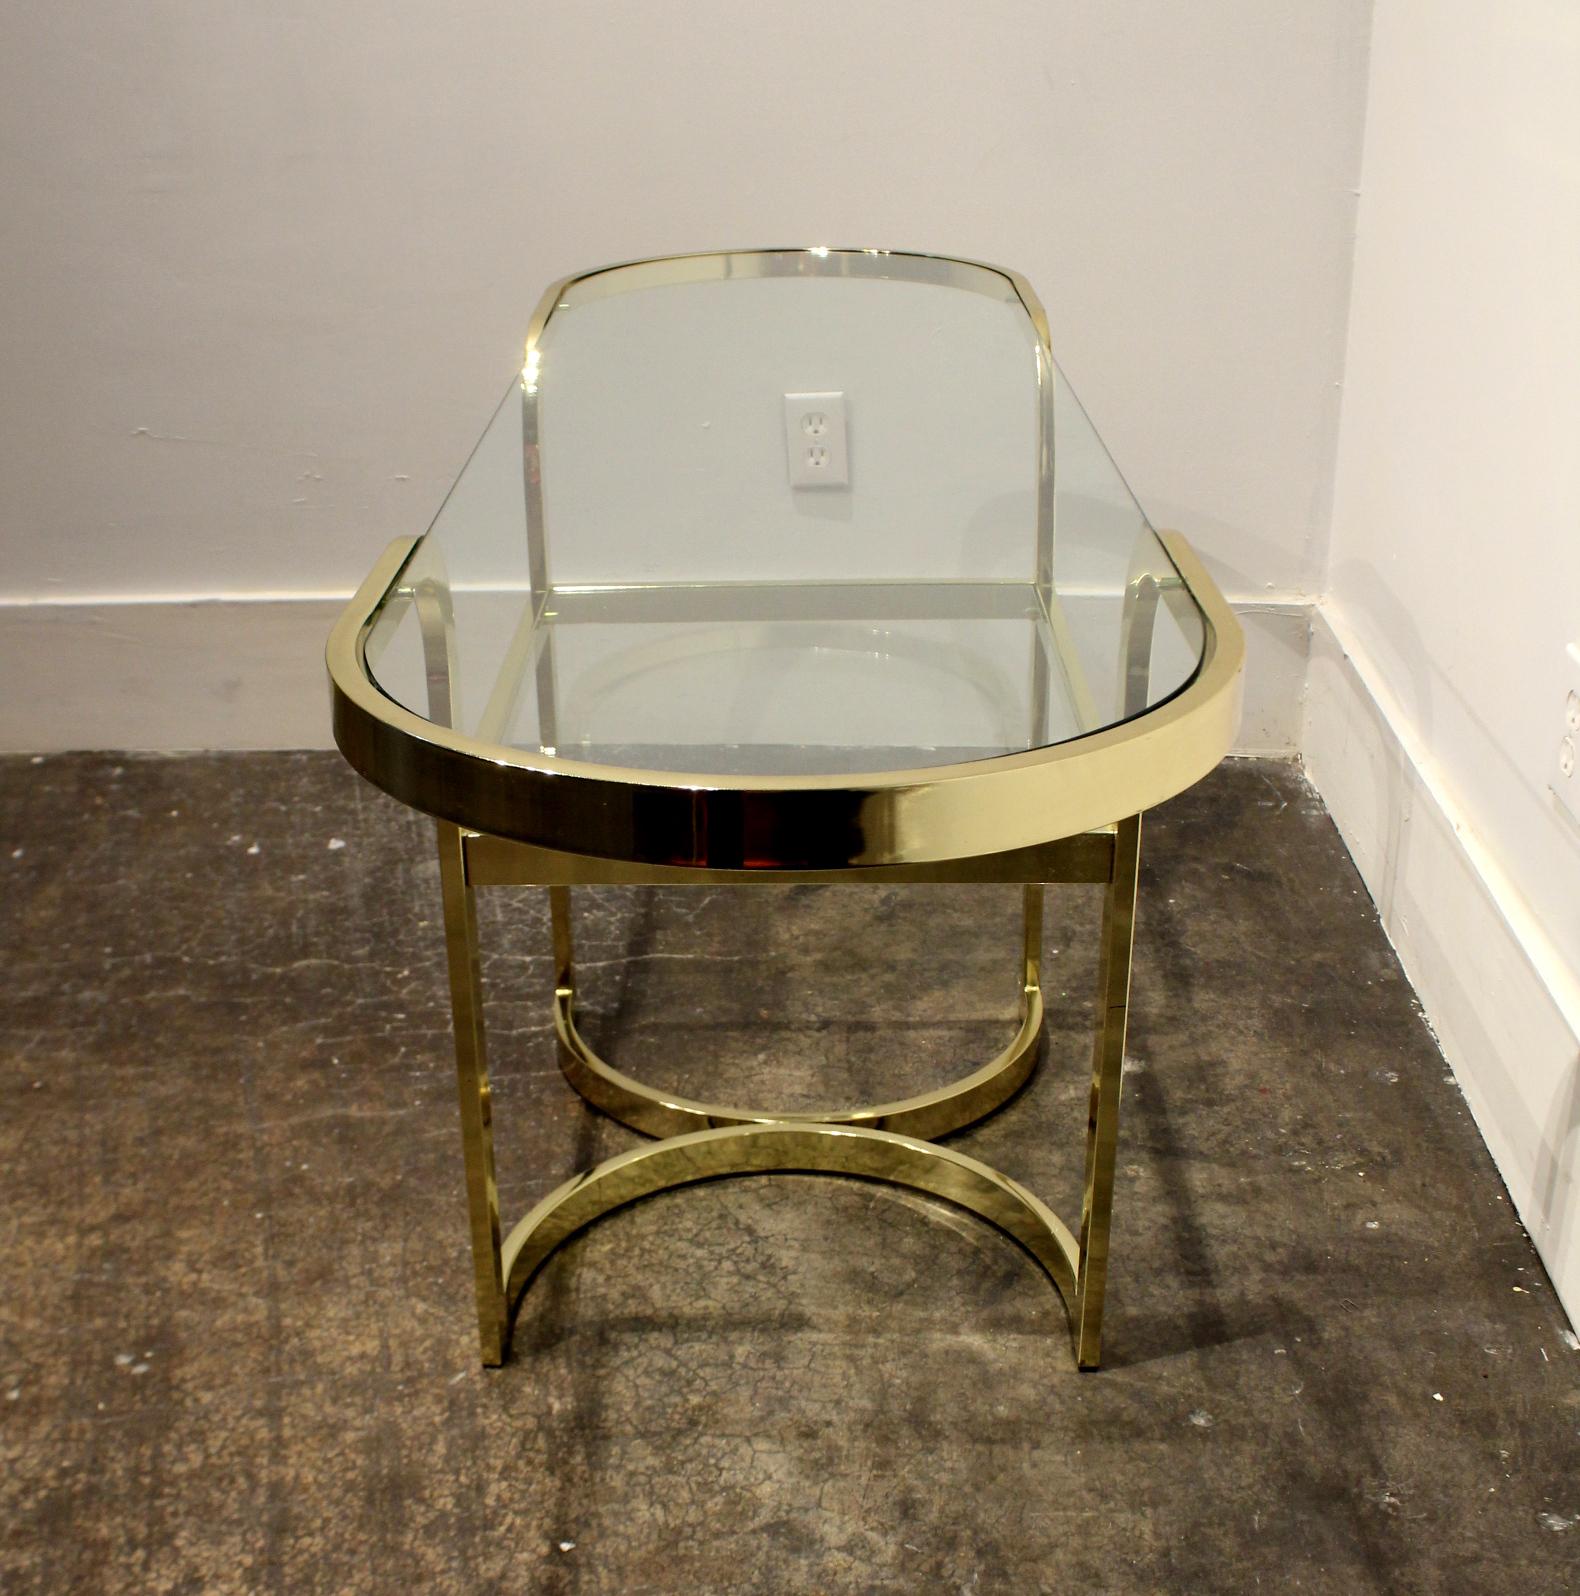 Brass Console Cafe Table with Pink Chairs by DIA Design Institute of America im Zustand „Gut“ im Angebot in Dallas, TX